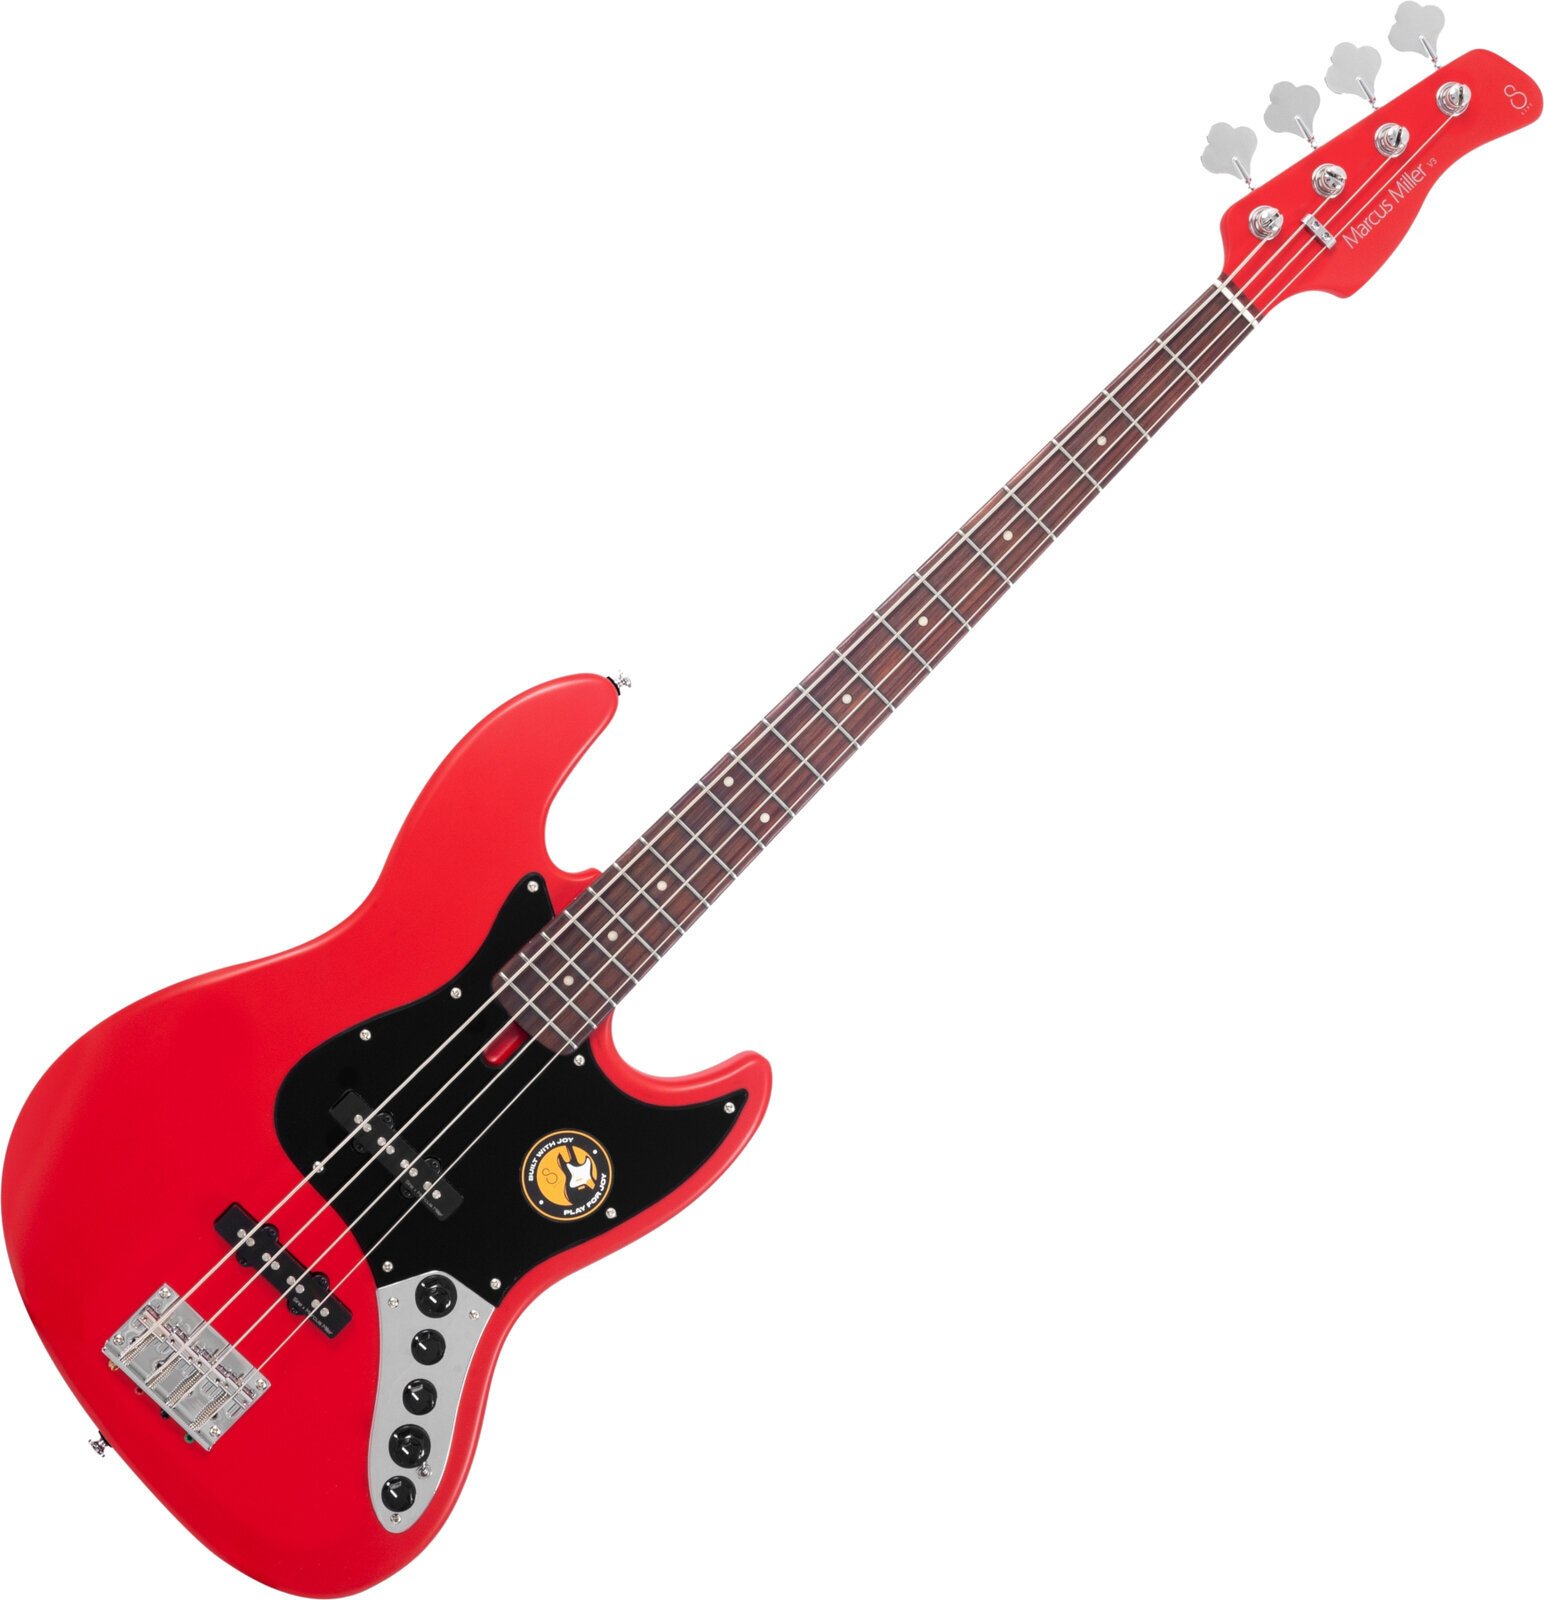 Bas electric Sire Marcus Miller V3-4 Red Satin